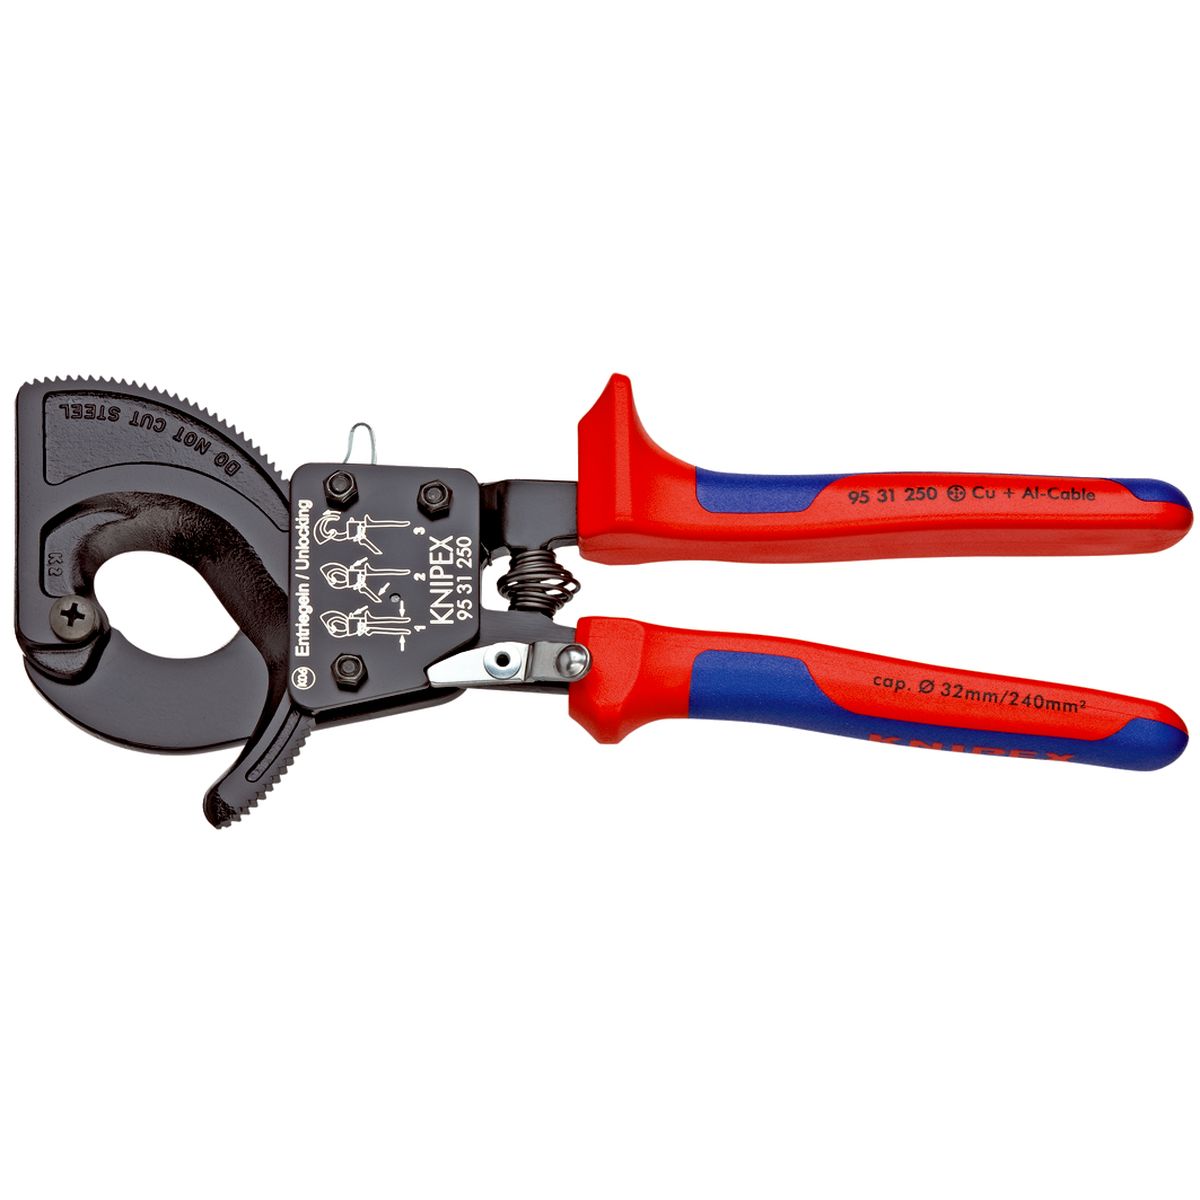 CABLE CUTTERS 9531 250mm Knipex